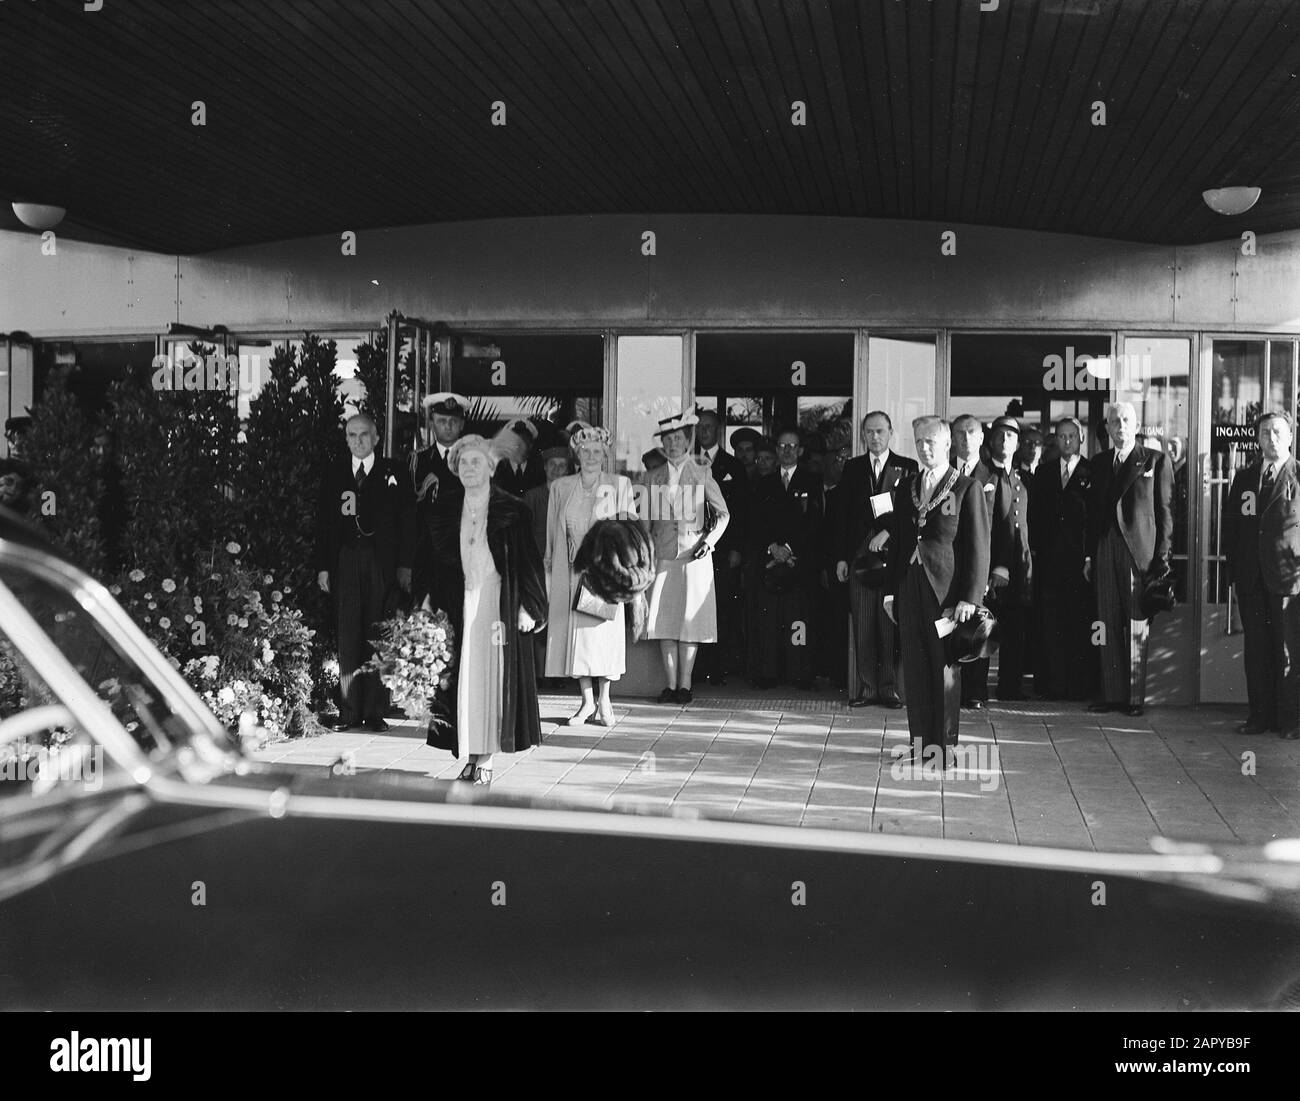 50th anniversary Queen Wilhelmina  Entry in Amsterdam, last as reigning frost.Departure from the Amstelstation. Date: 30 August 1948 Location: Amsterdam, Noord-Holland Keywords: anniversaries, royal house, railways Personal name: Wilhelmina, queen Institution name: Amstelstation Stock Photo